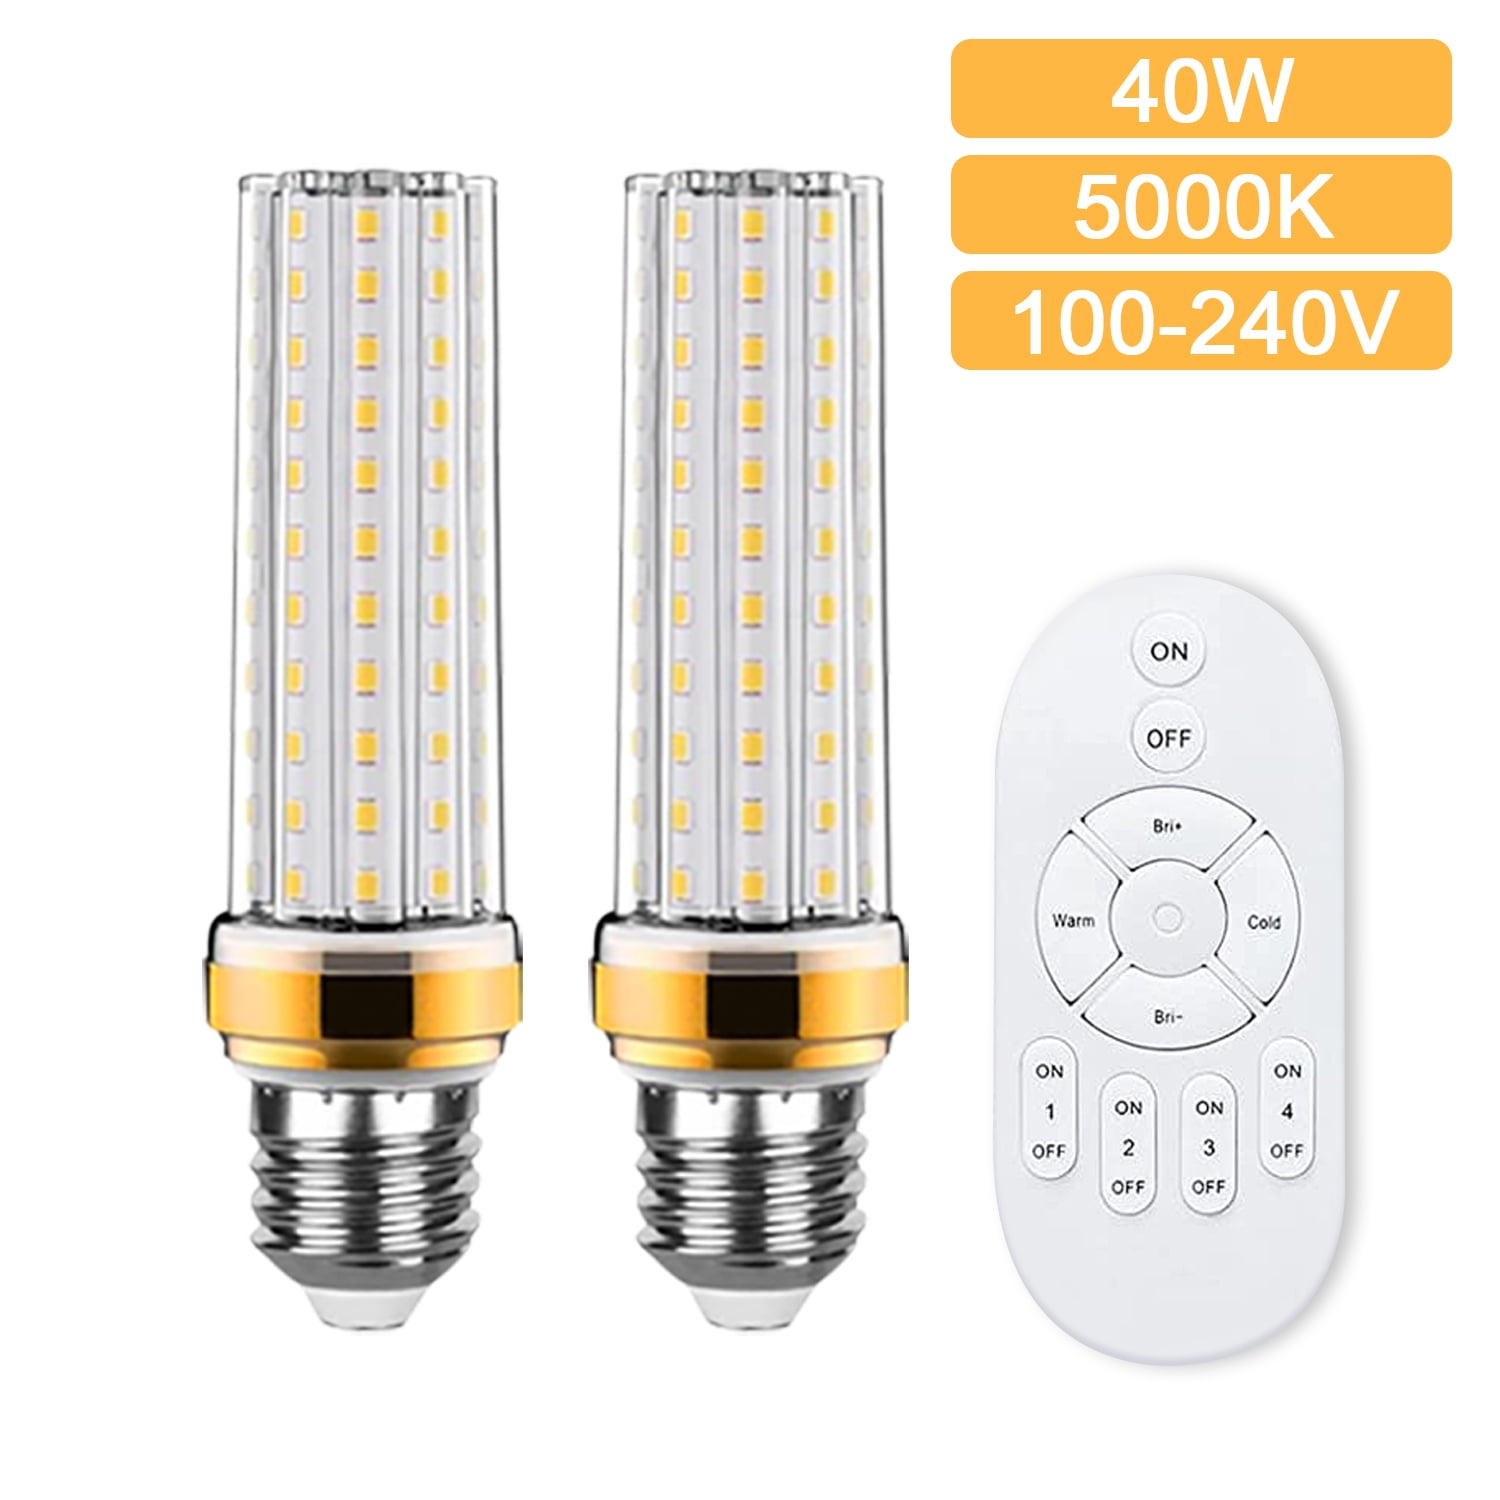 Uændret Hende selv permeabilitet Corn Smart Led Light Bulb, 40W Bulbs 5000 Lumen,E27 Based Smart LED Light  Bulbs Dimmable with 2.4GHz Wireless 3-Zone Remote Control, Dimmable & Color  Temperature (2 bulb + 1 Remote) - Walmart.com